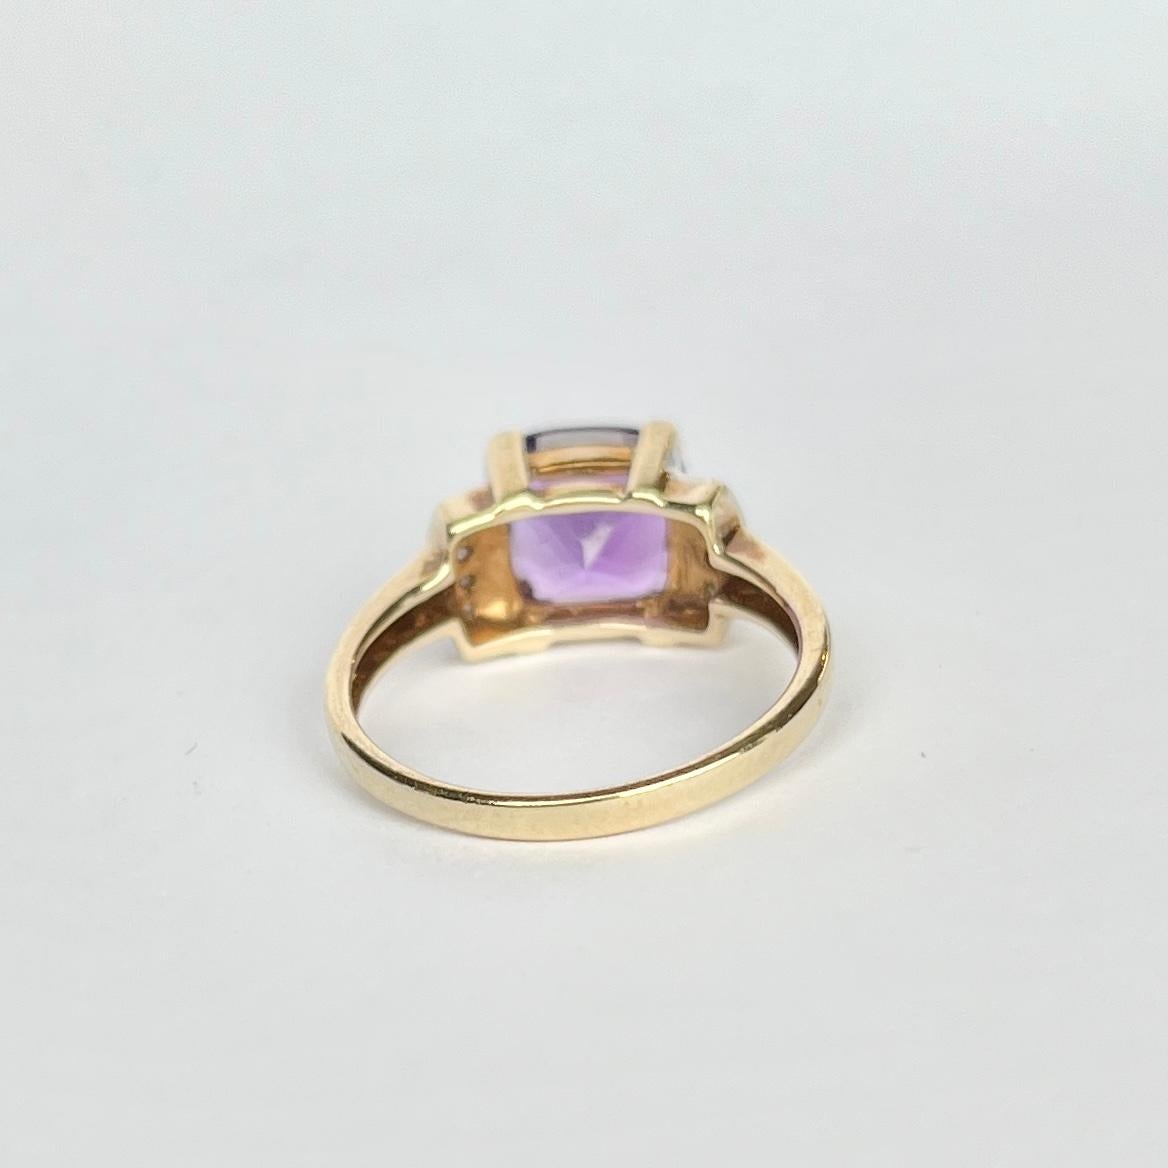 Vintage Amethyst and Diamond 9 Carat Gold Ring In Good Condition For Sale In Chipping Campden, GB